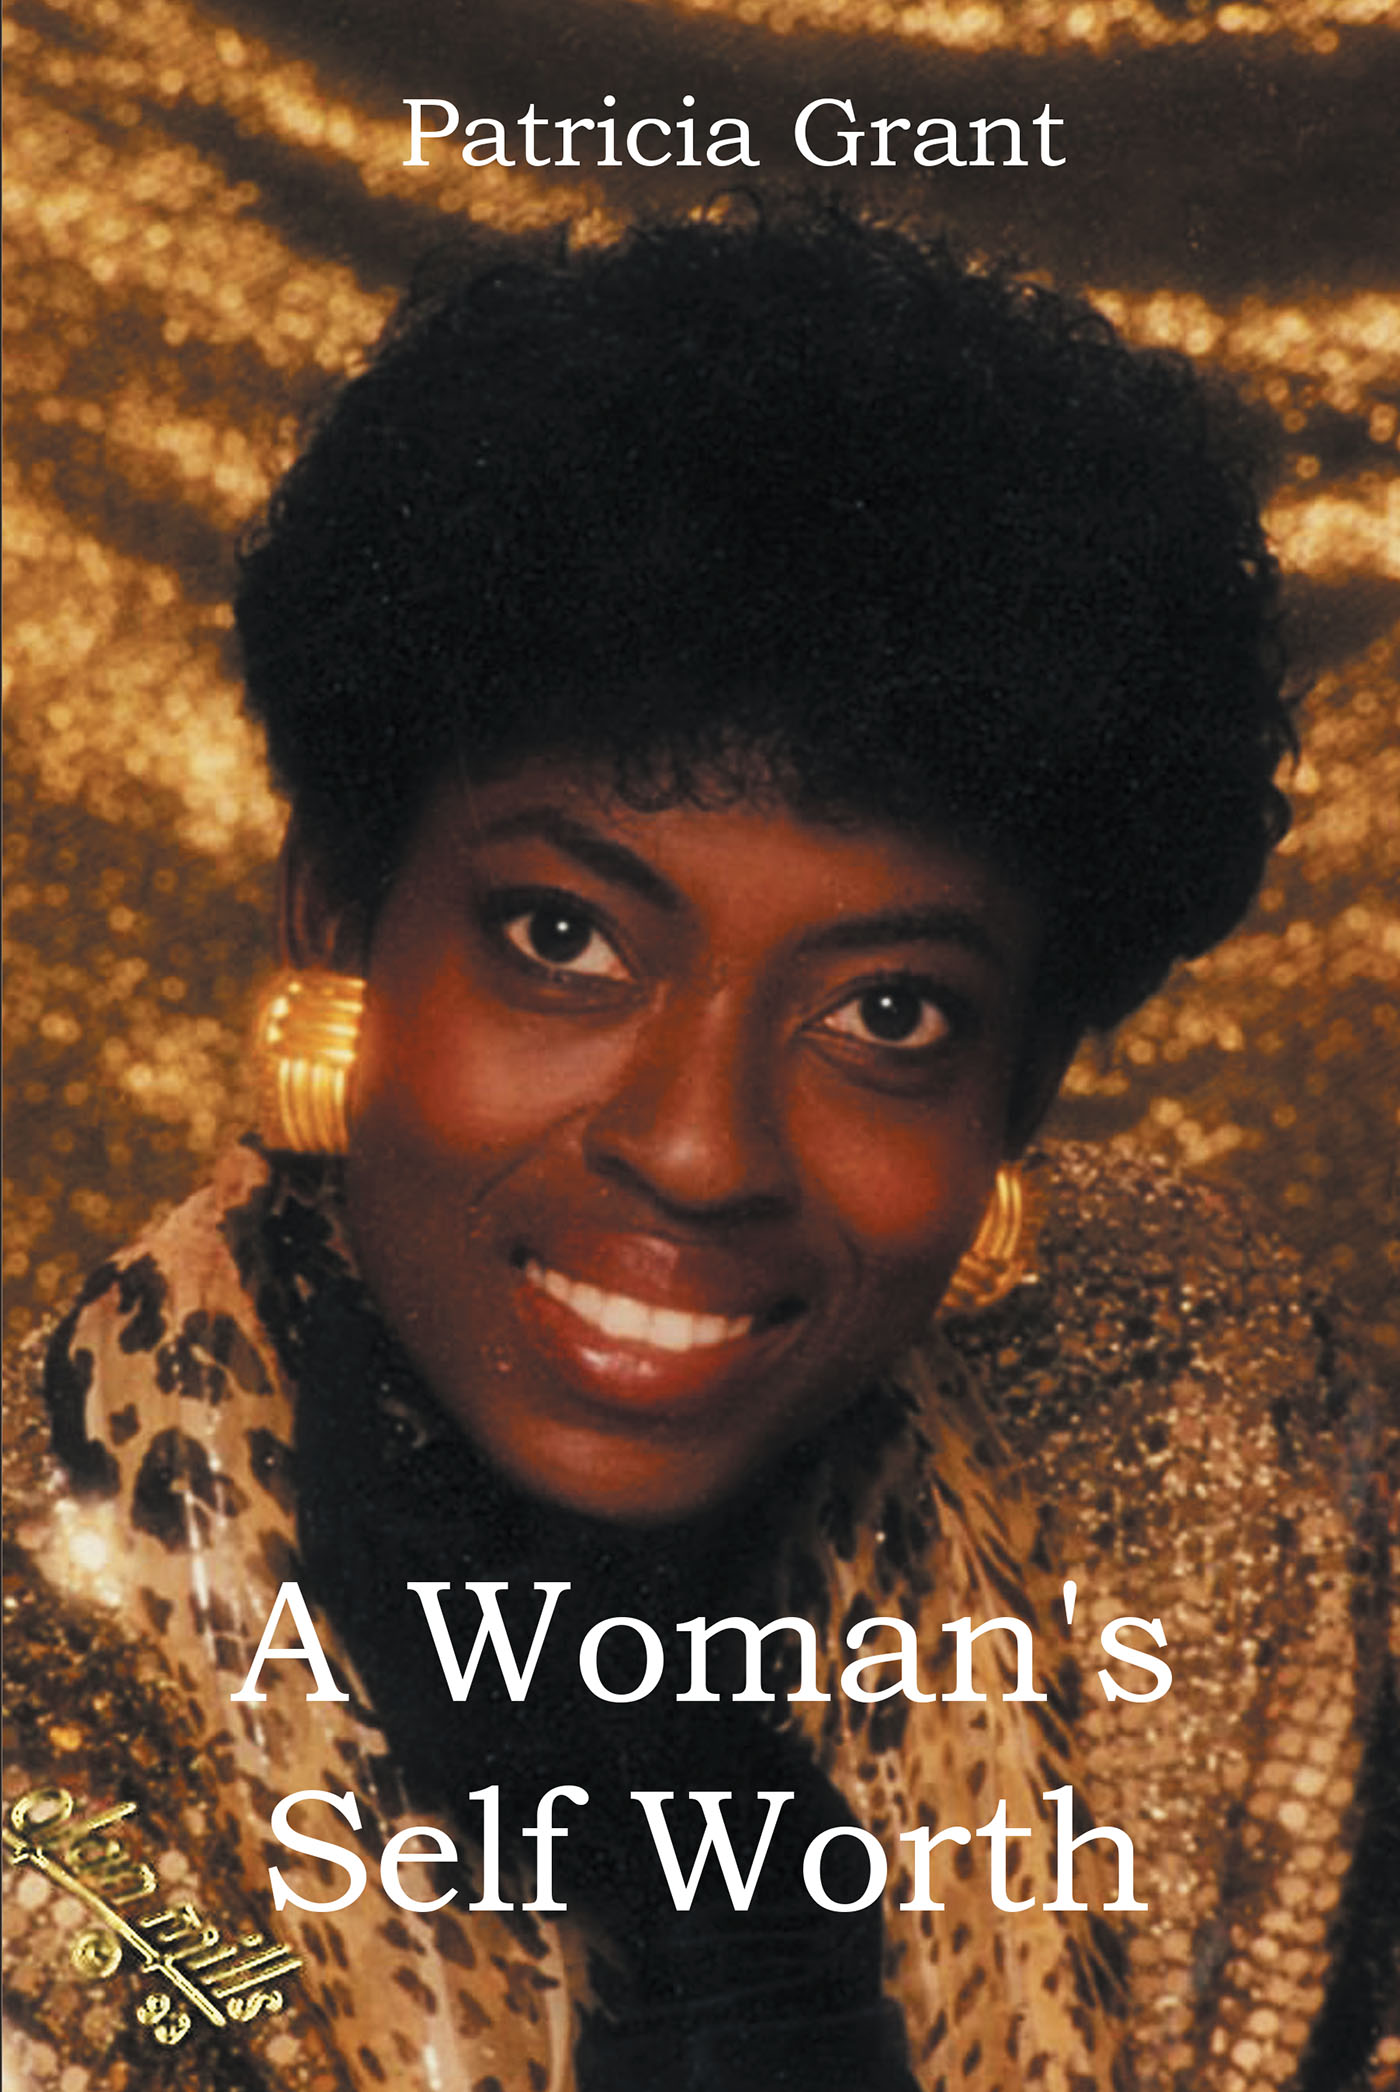 Author Patricia Grant’s New Book, "A Woman’s Self Worth," is an Endlessly Empowering Work That Speaks to Anyone Going Through Obstacles in Life